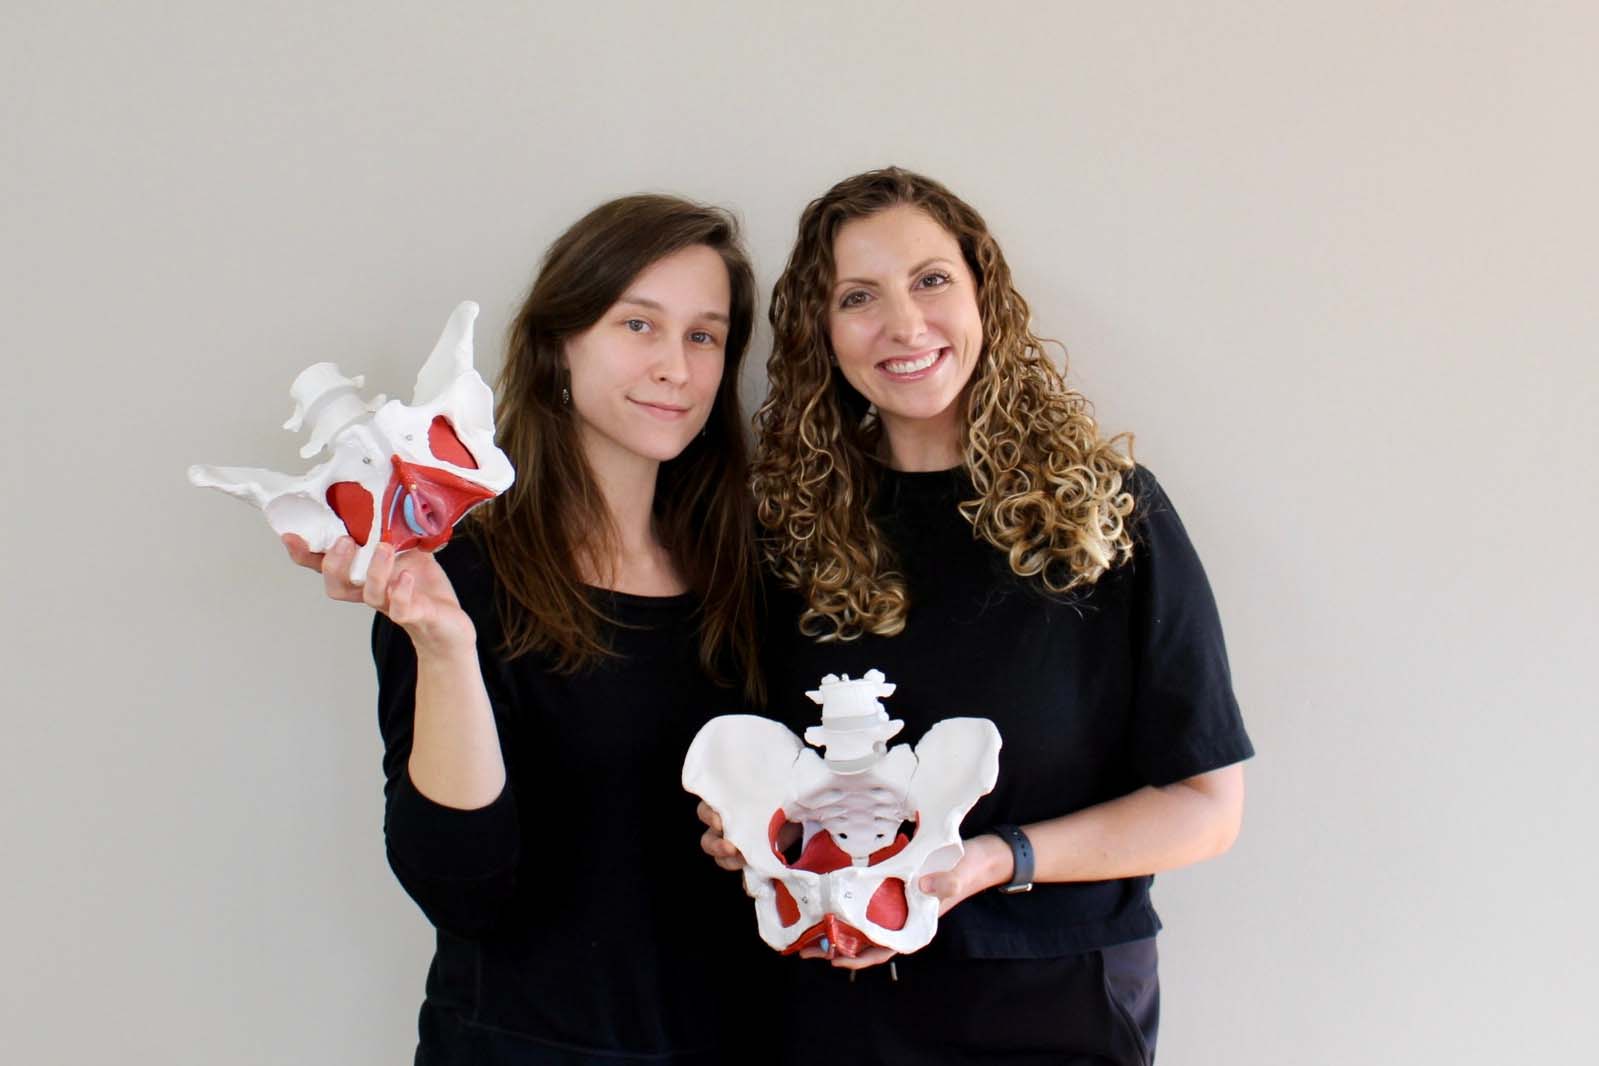 Two women, one with long straight hair and the other with curly hair, smiling and holding anatomical models of the human pelvis in a physical therapy clinic specializing in pelvic health.